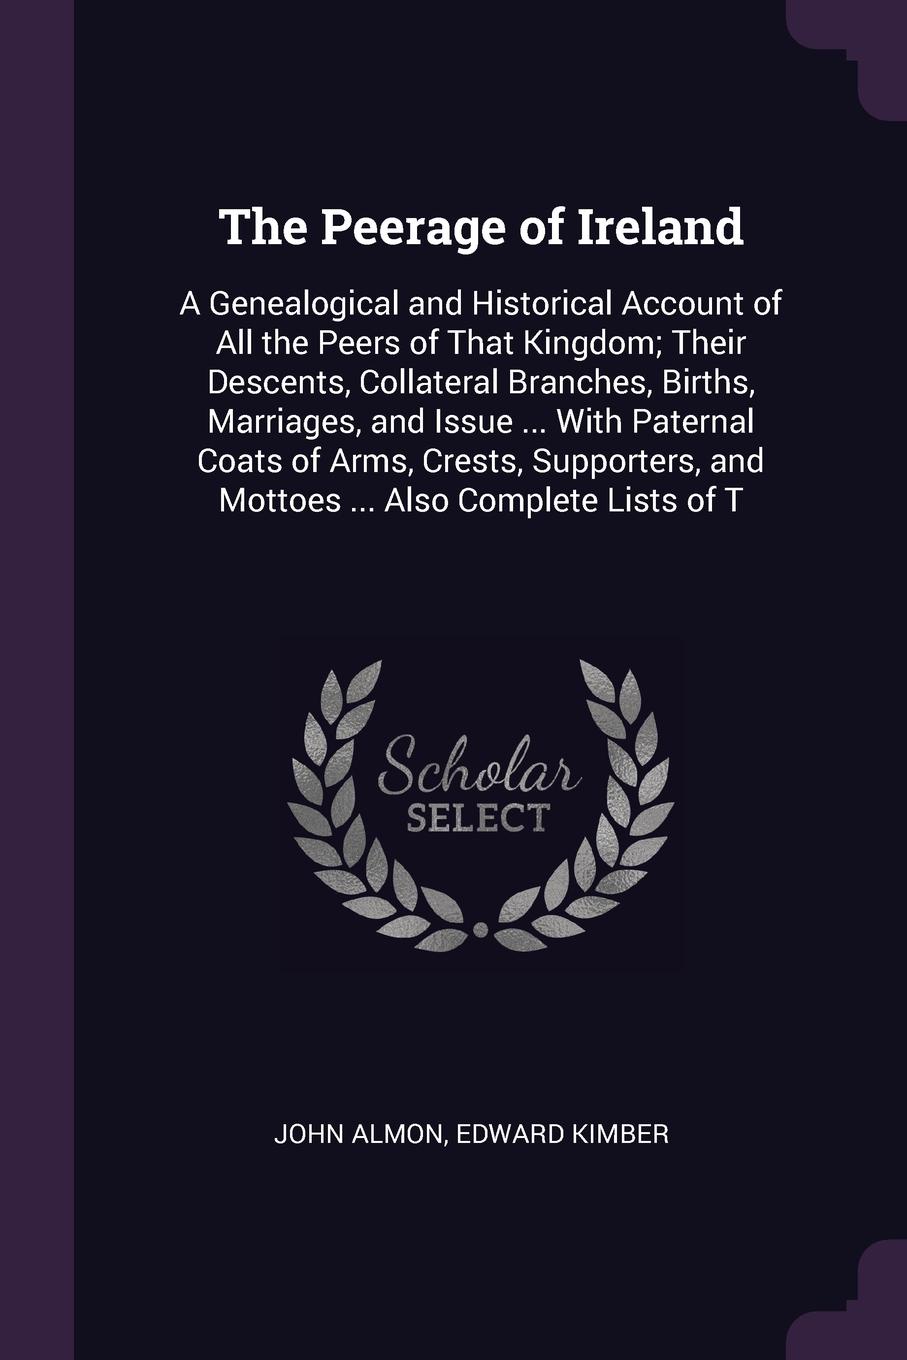 The Peerage of Ireland. A Genealogical and Historical Account of All the Peers of That Kingdom; Their Descents, Collateral Branches, Births, Marriages, and Issue ... With Paternal Coats of Arms, Crests, Supporters, and Mottoes ... Also Complete Li...